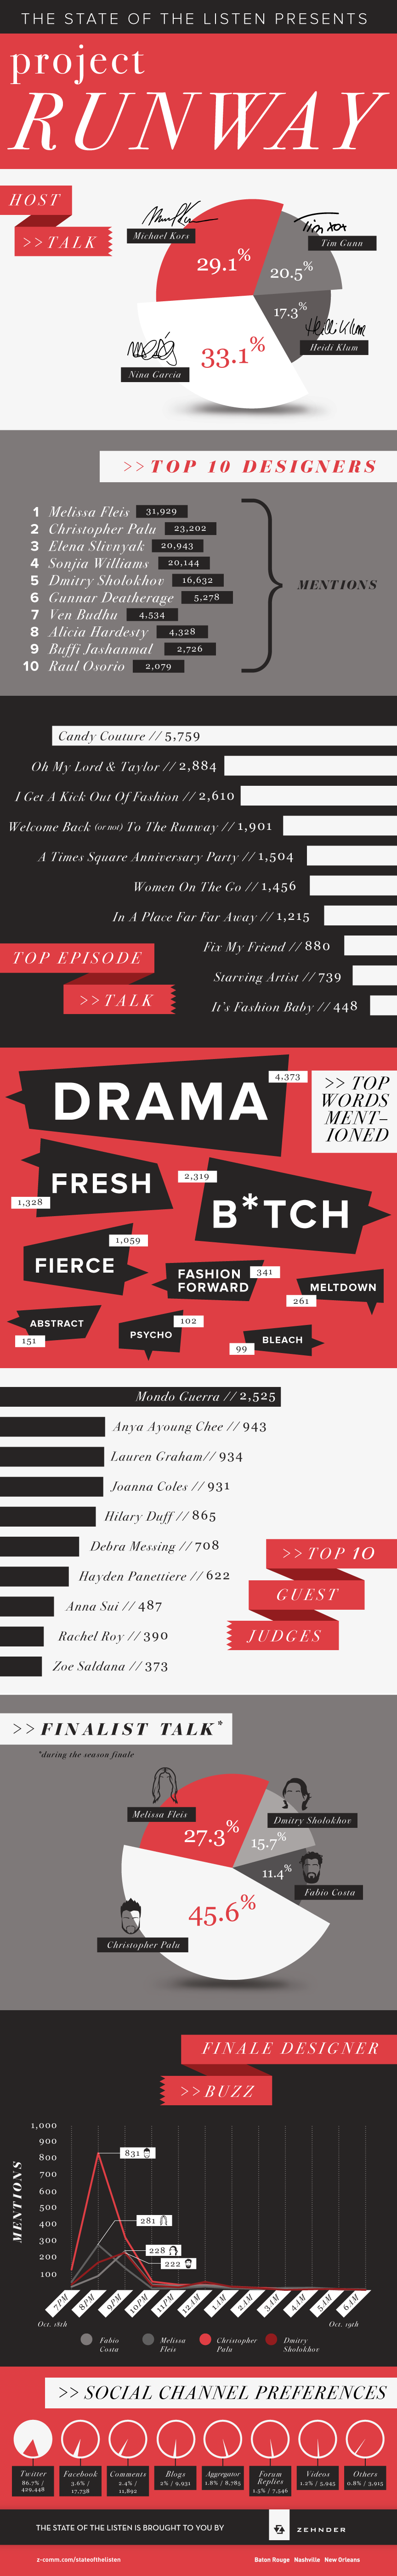 Project Runway Infographic